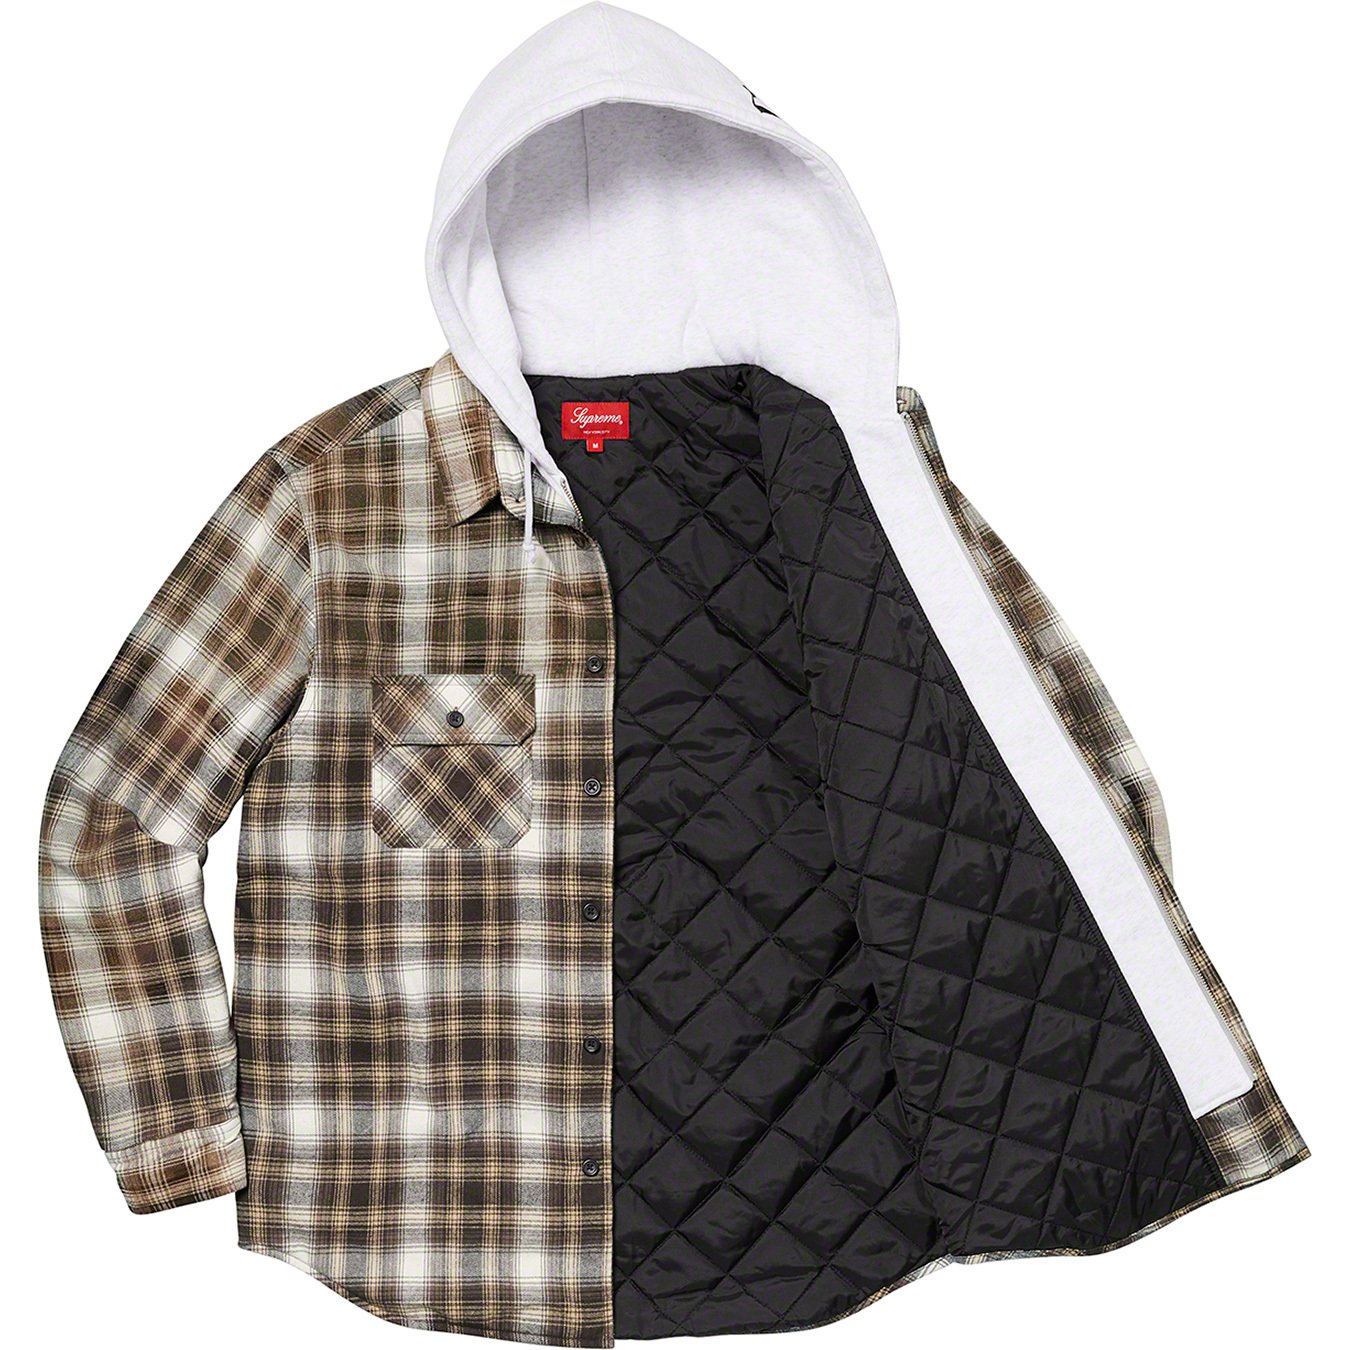 M Supreme Hooded Flannel Zip Up Shirt